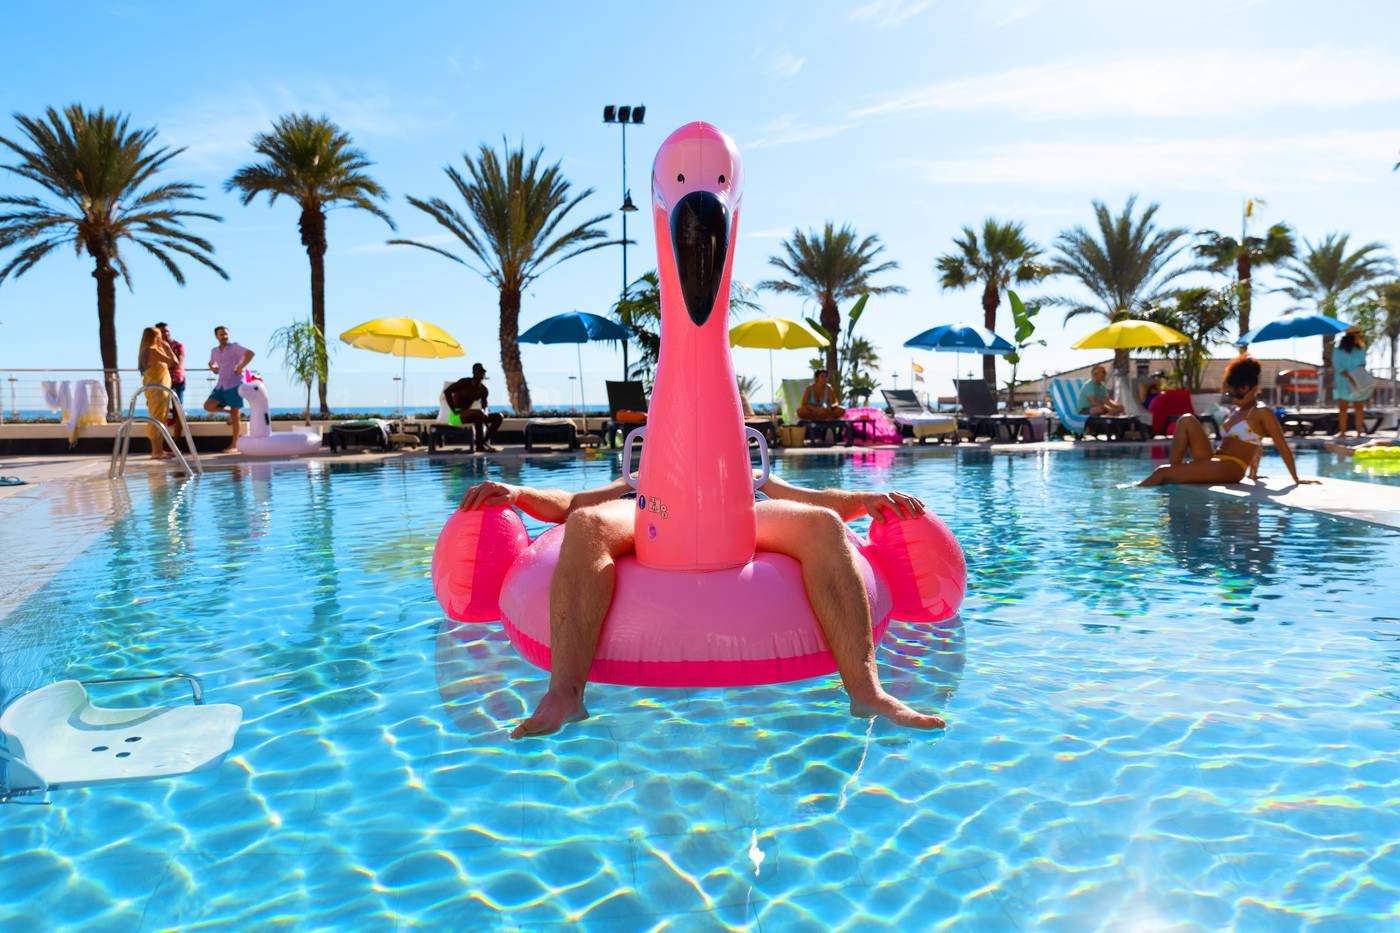 Person on inflatable flamingo in pool